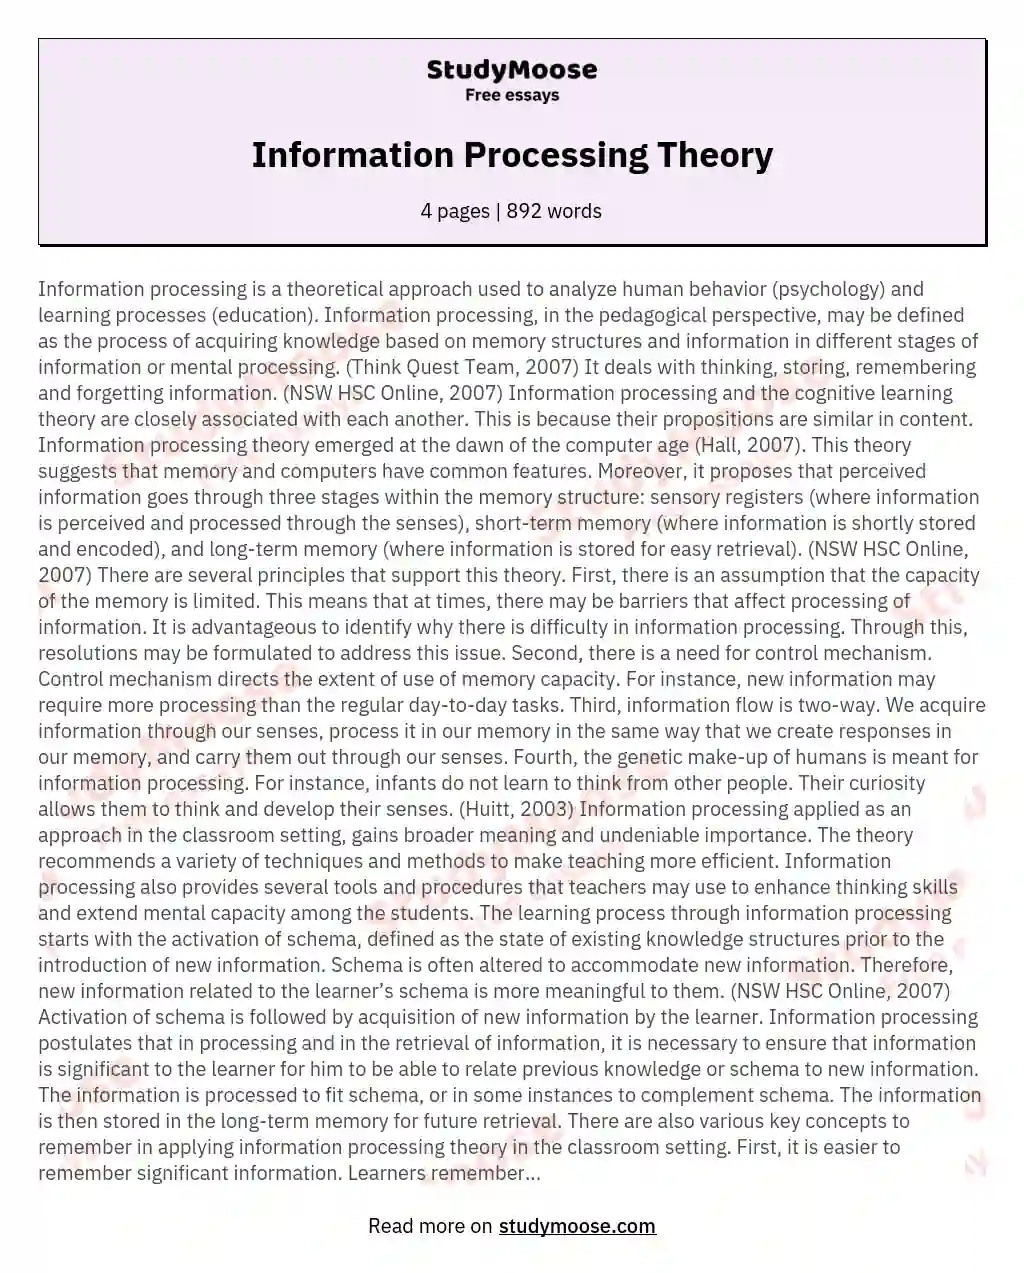 Information Processing Theory essay